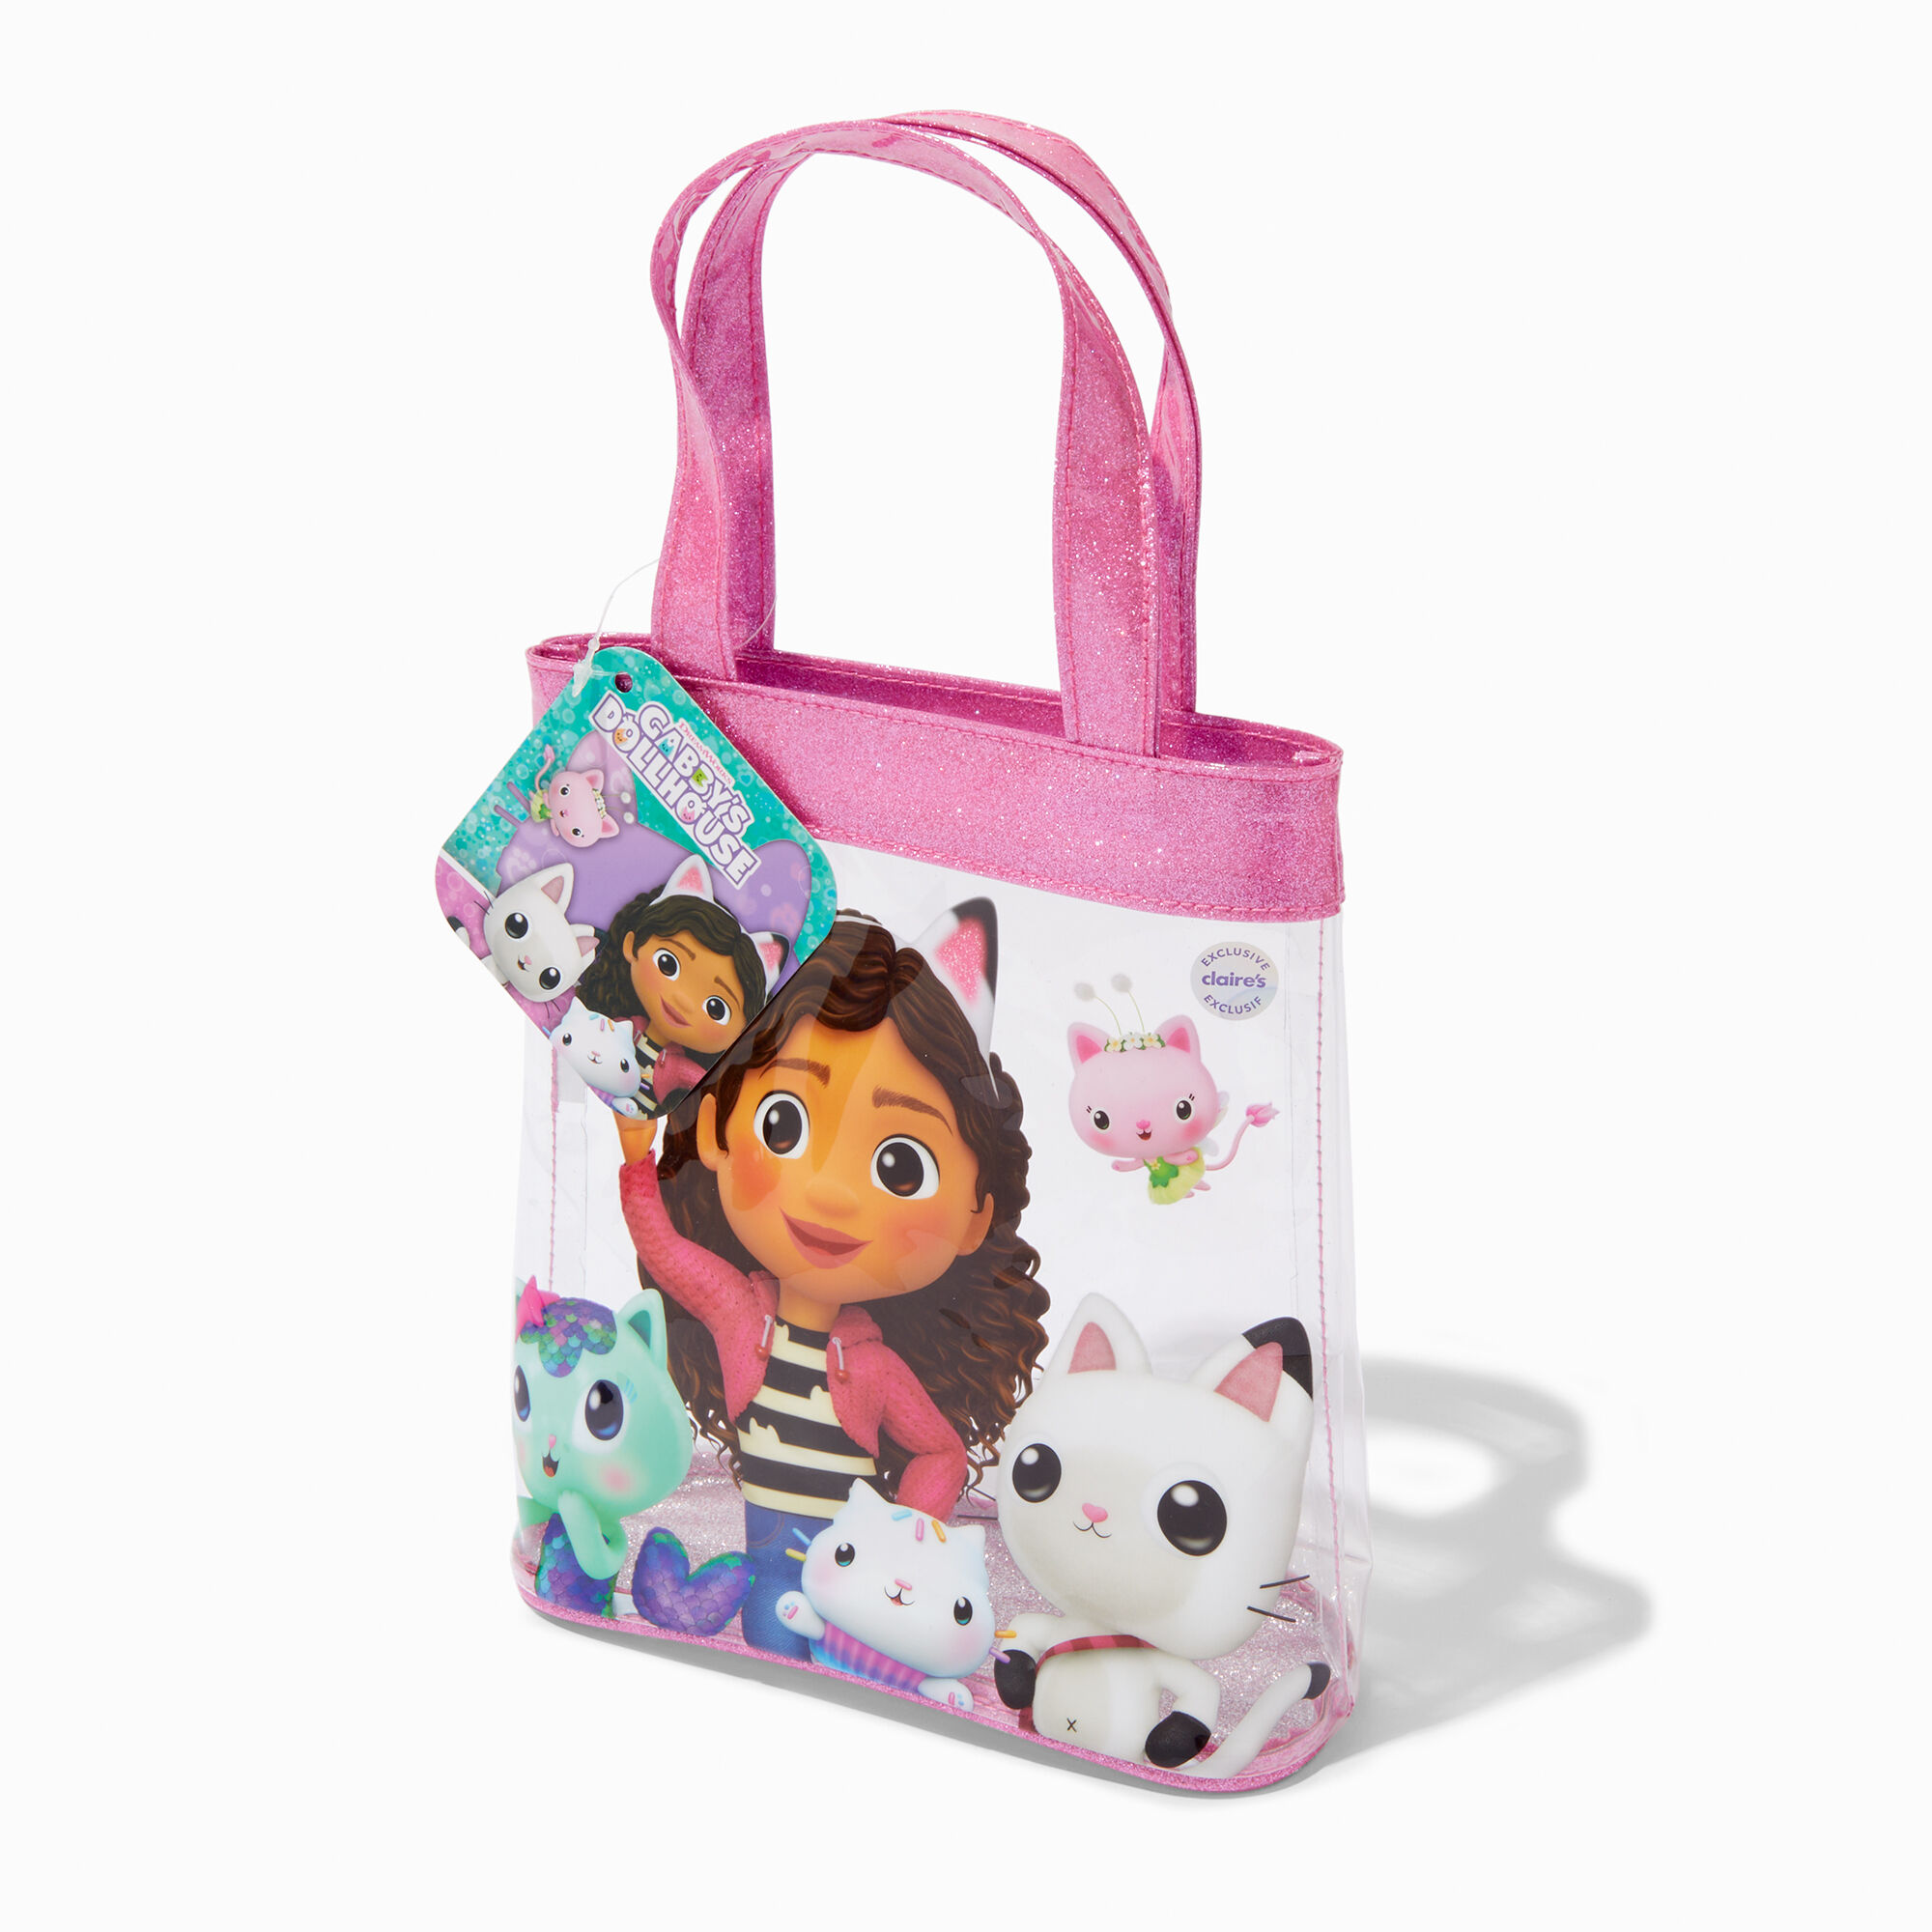 View Claires Gabbys Dollhouse Tote Bag information